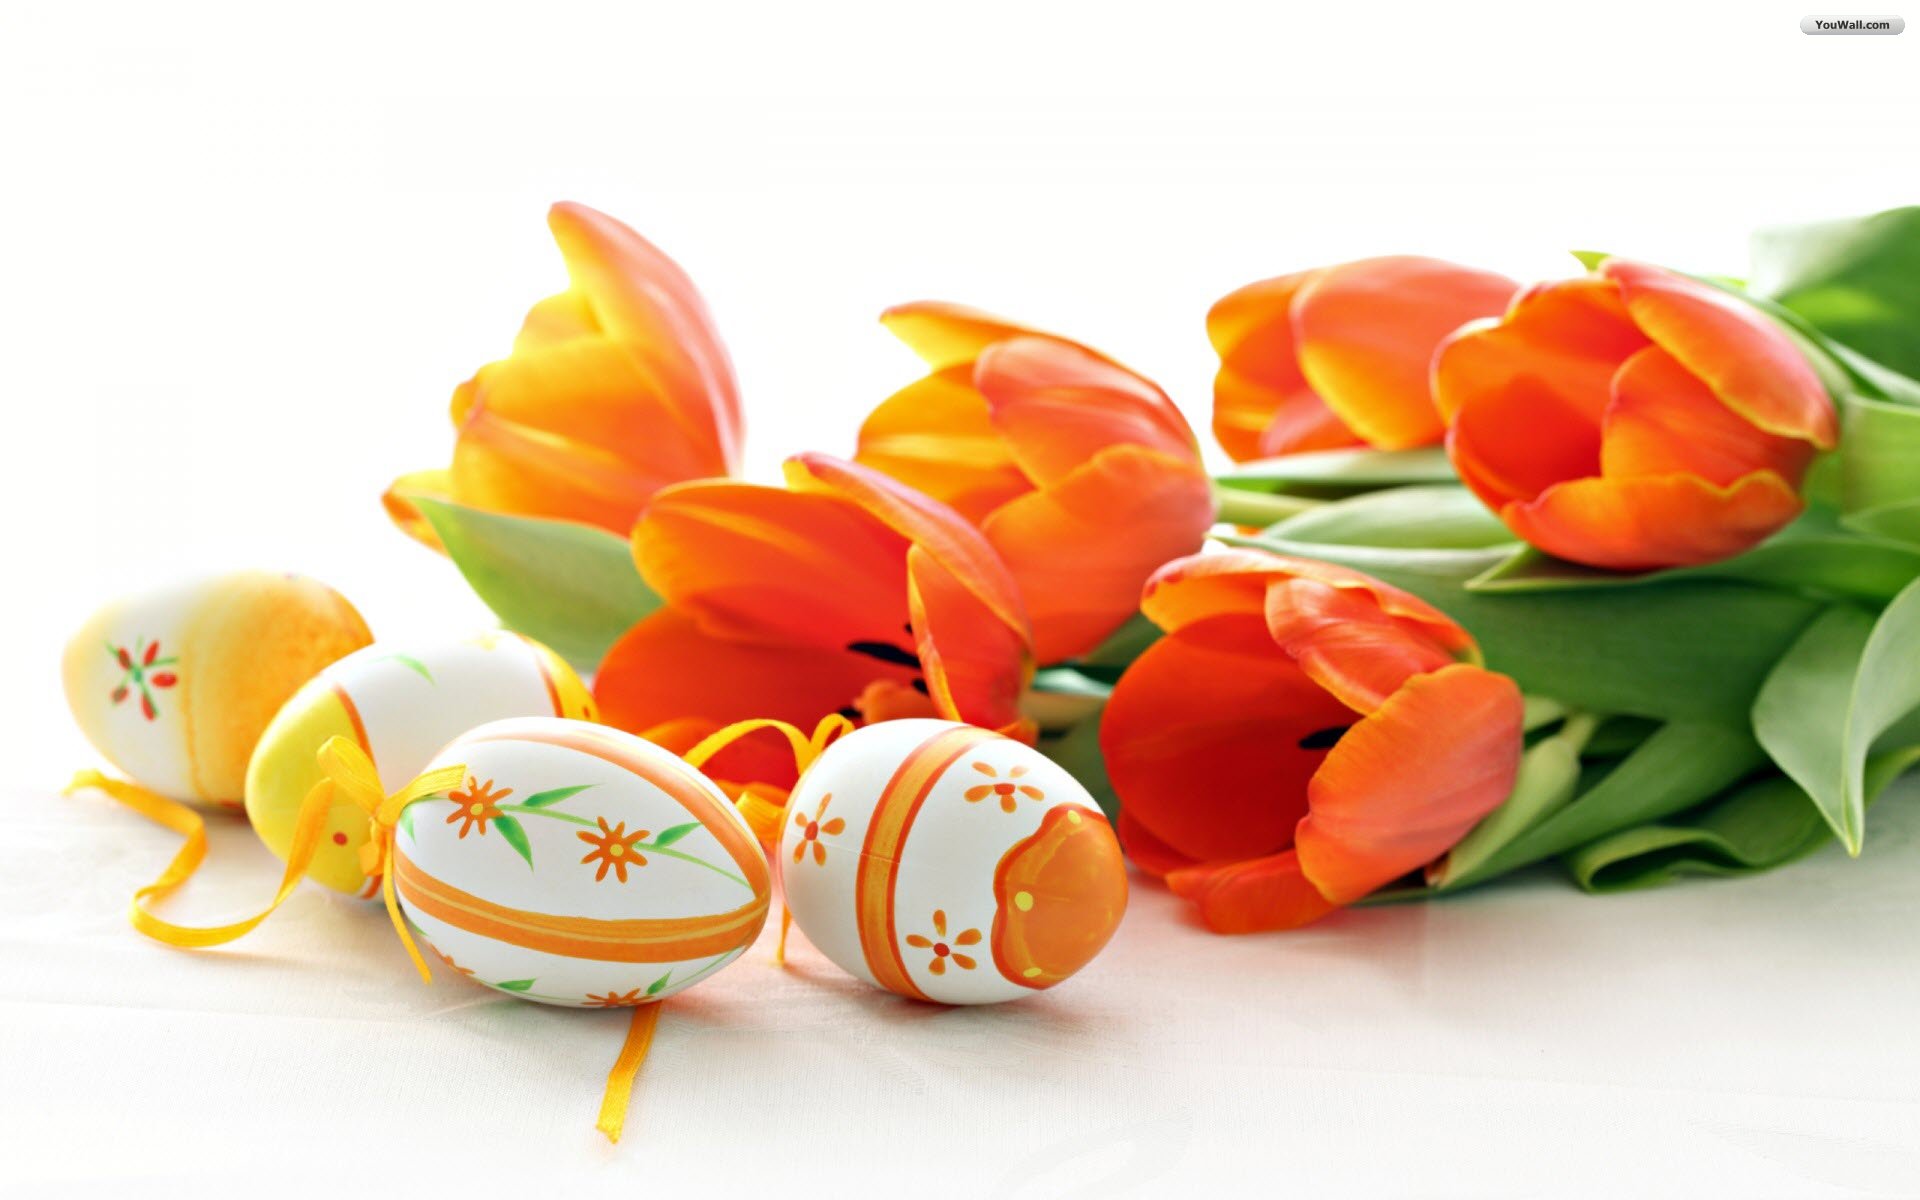 Youwall Easter Eggs And Flowers Wallpaper